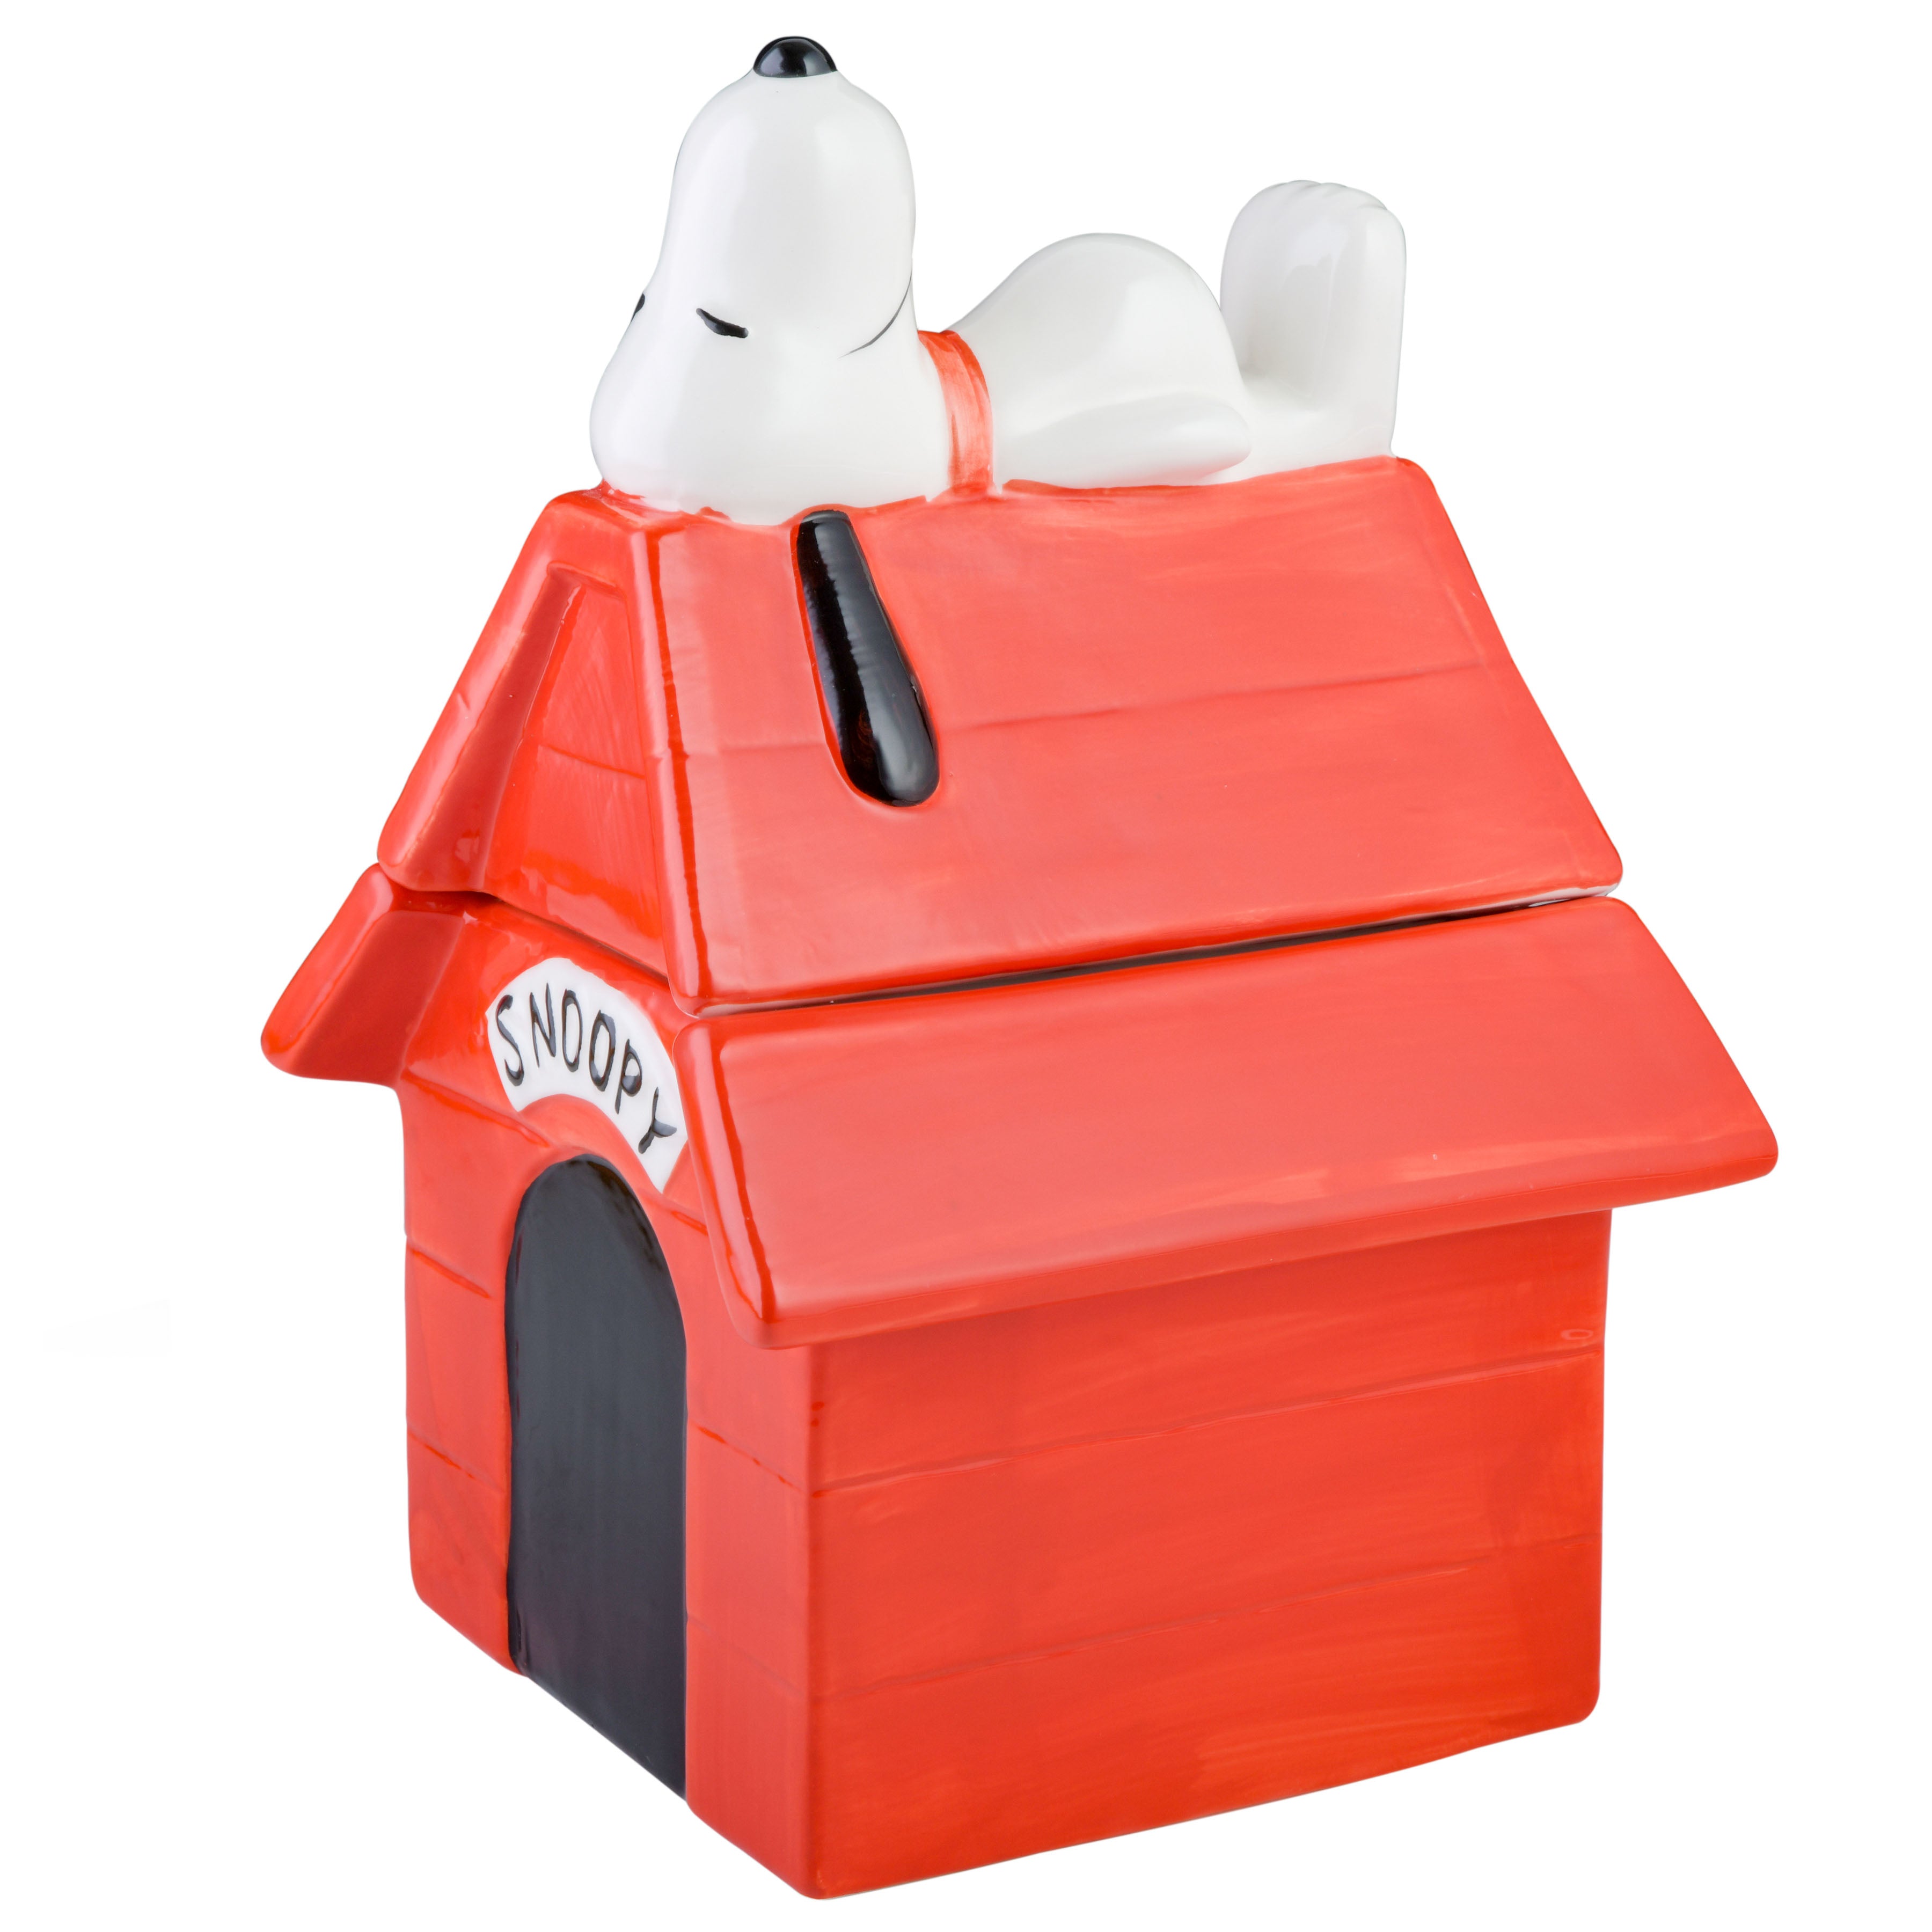 Peanuts Classic Snoopy Doghouse 11" Ceramic Cookie Jar w/ Fitted Lid